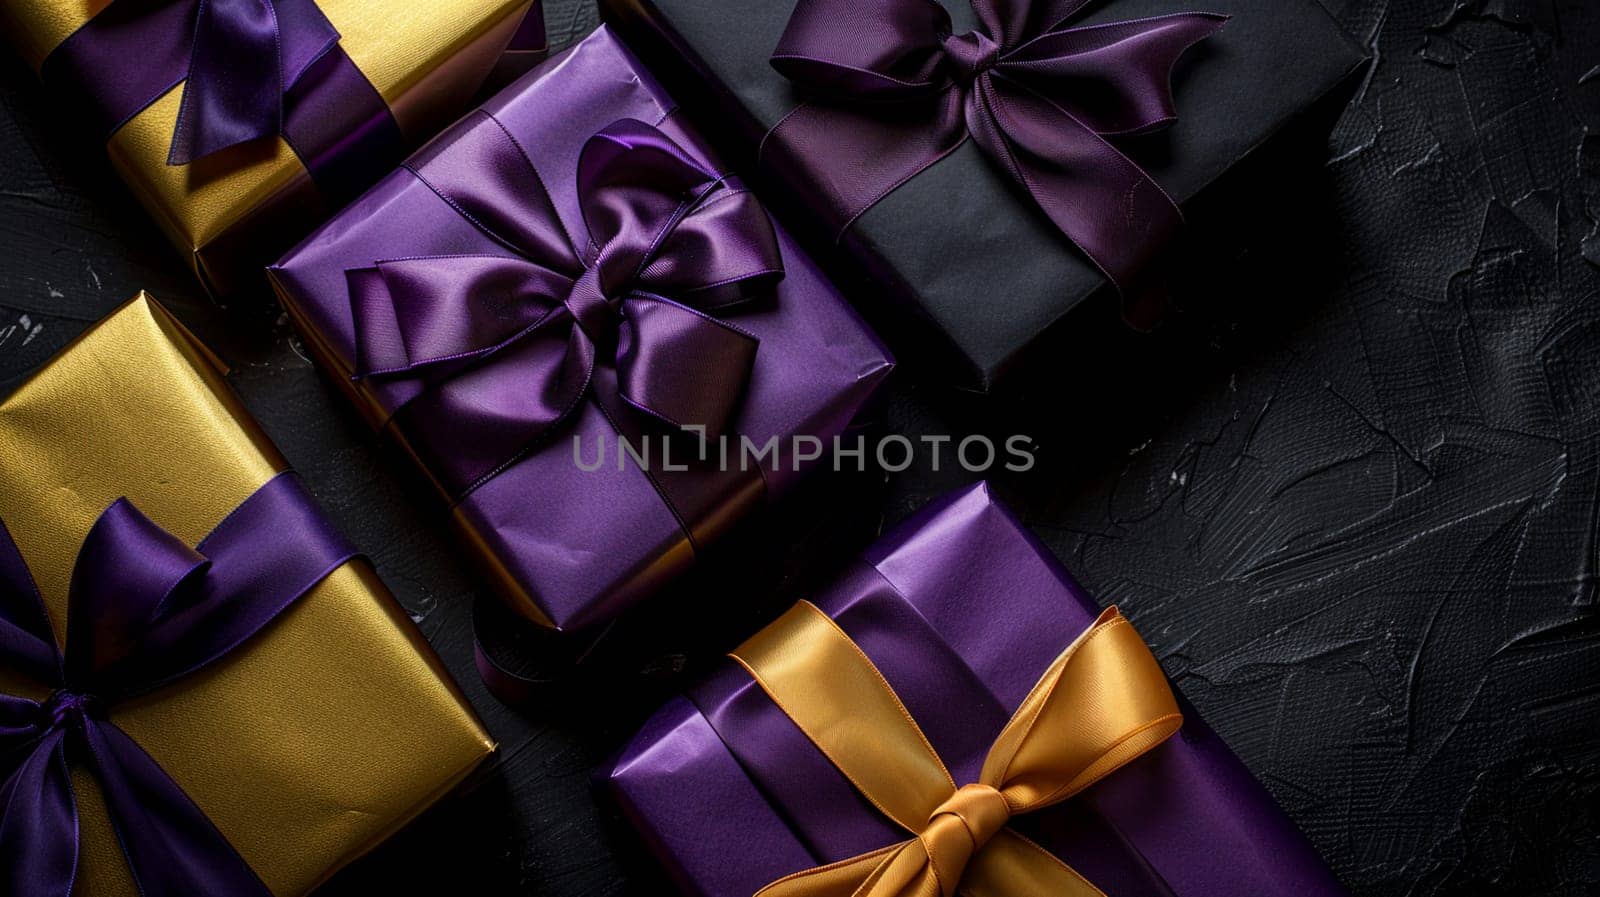 Luxury present boxes tied with colorful ribbons arranged neatly on a dark textured surface, capturing celebration and surprise.